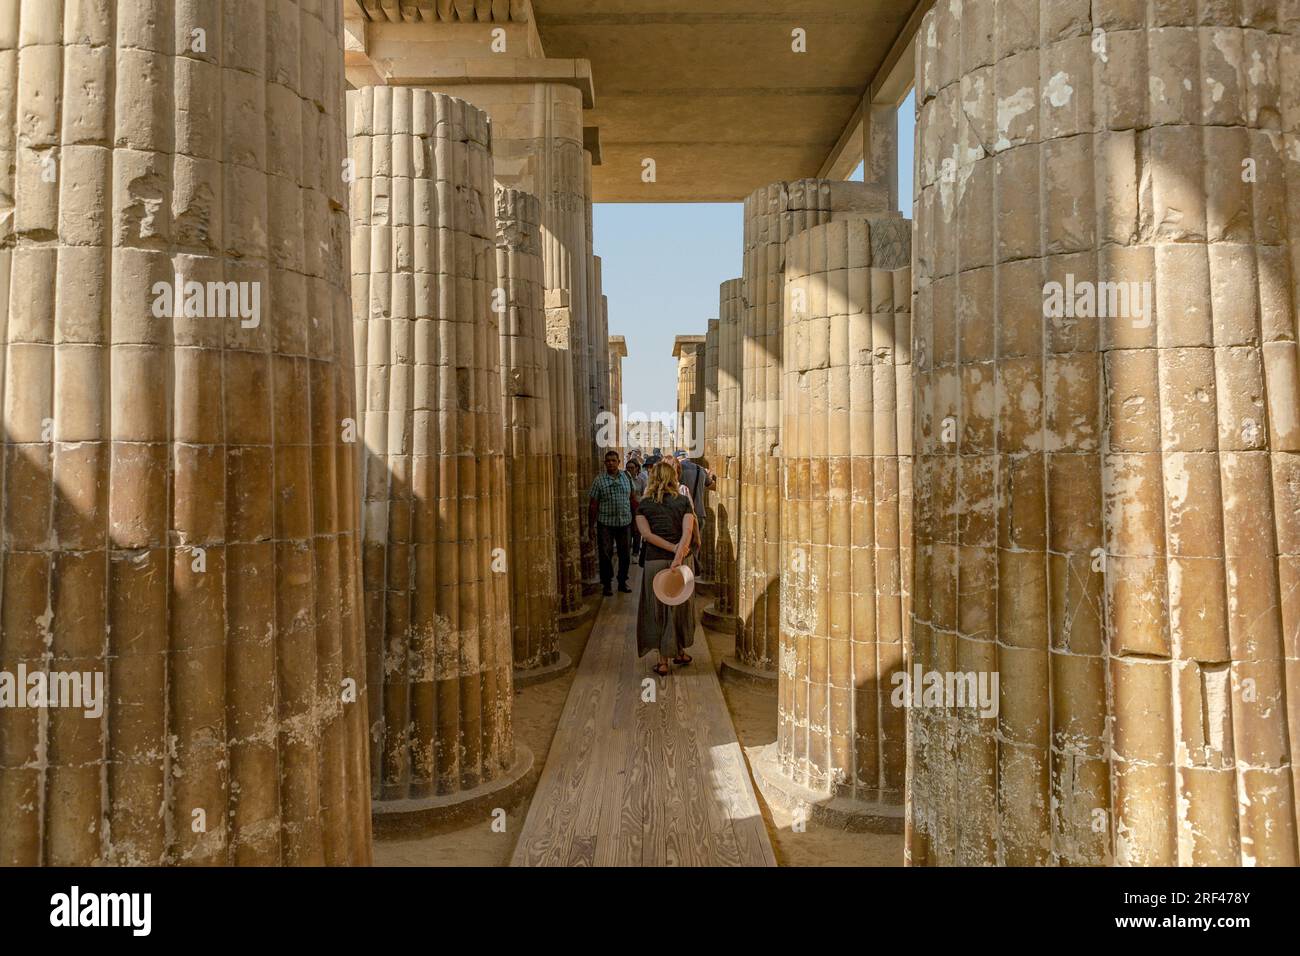 Reed-like pillars in the Entrance Connade of the Funerary Complex of Djoser at Saqqara Stock Photo